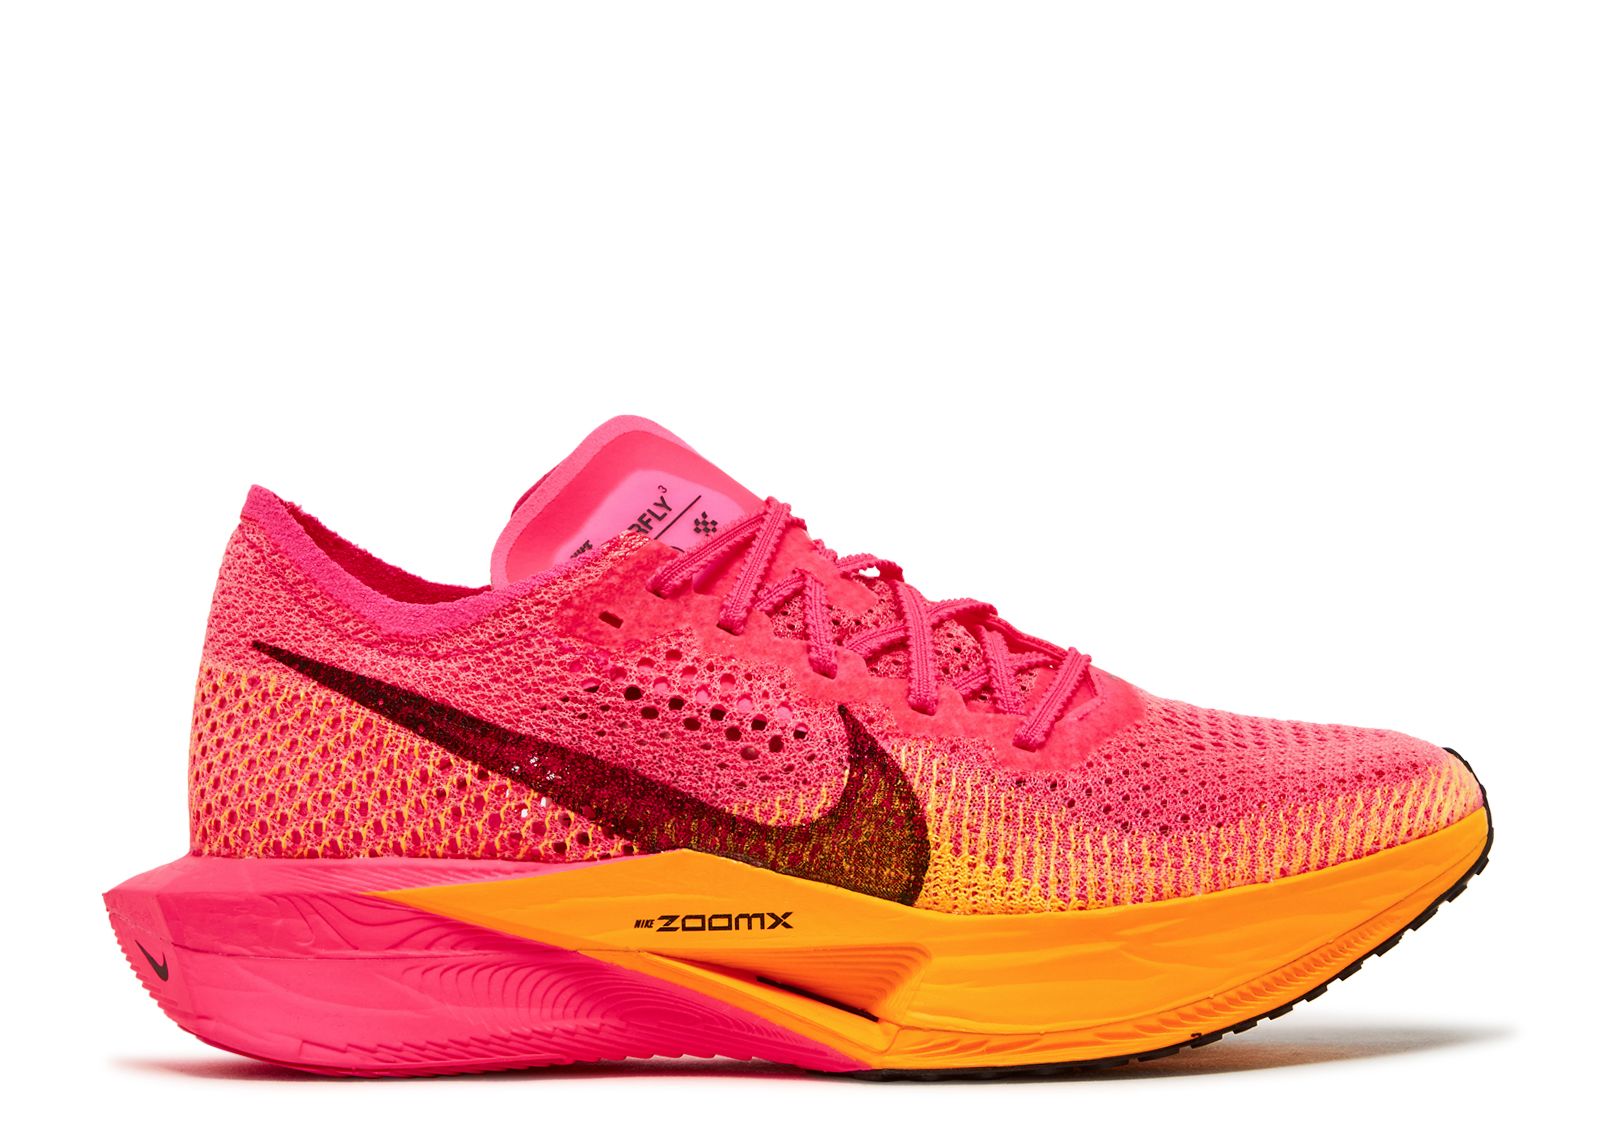 The Womens's Vaporfly 3 from Nike in pink is one of the best and fastest shoes ever